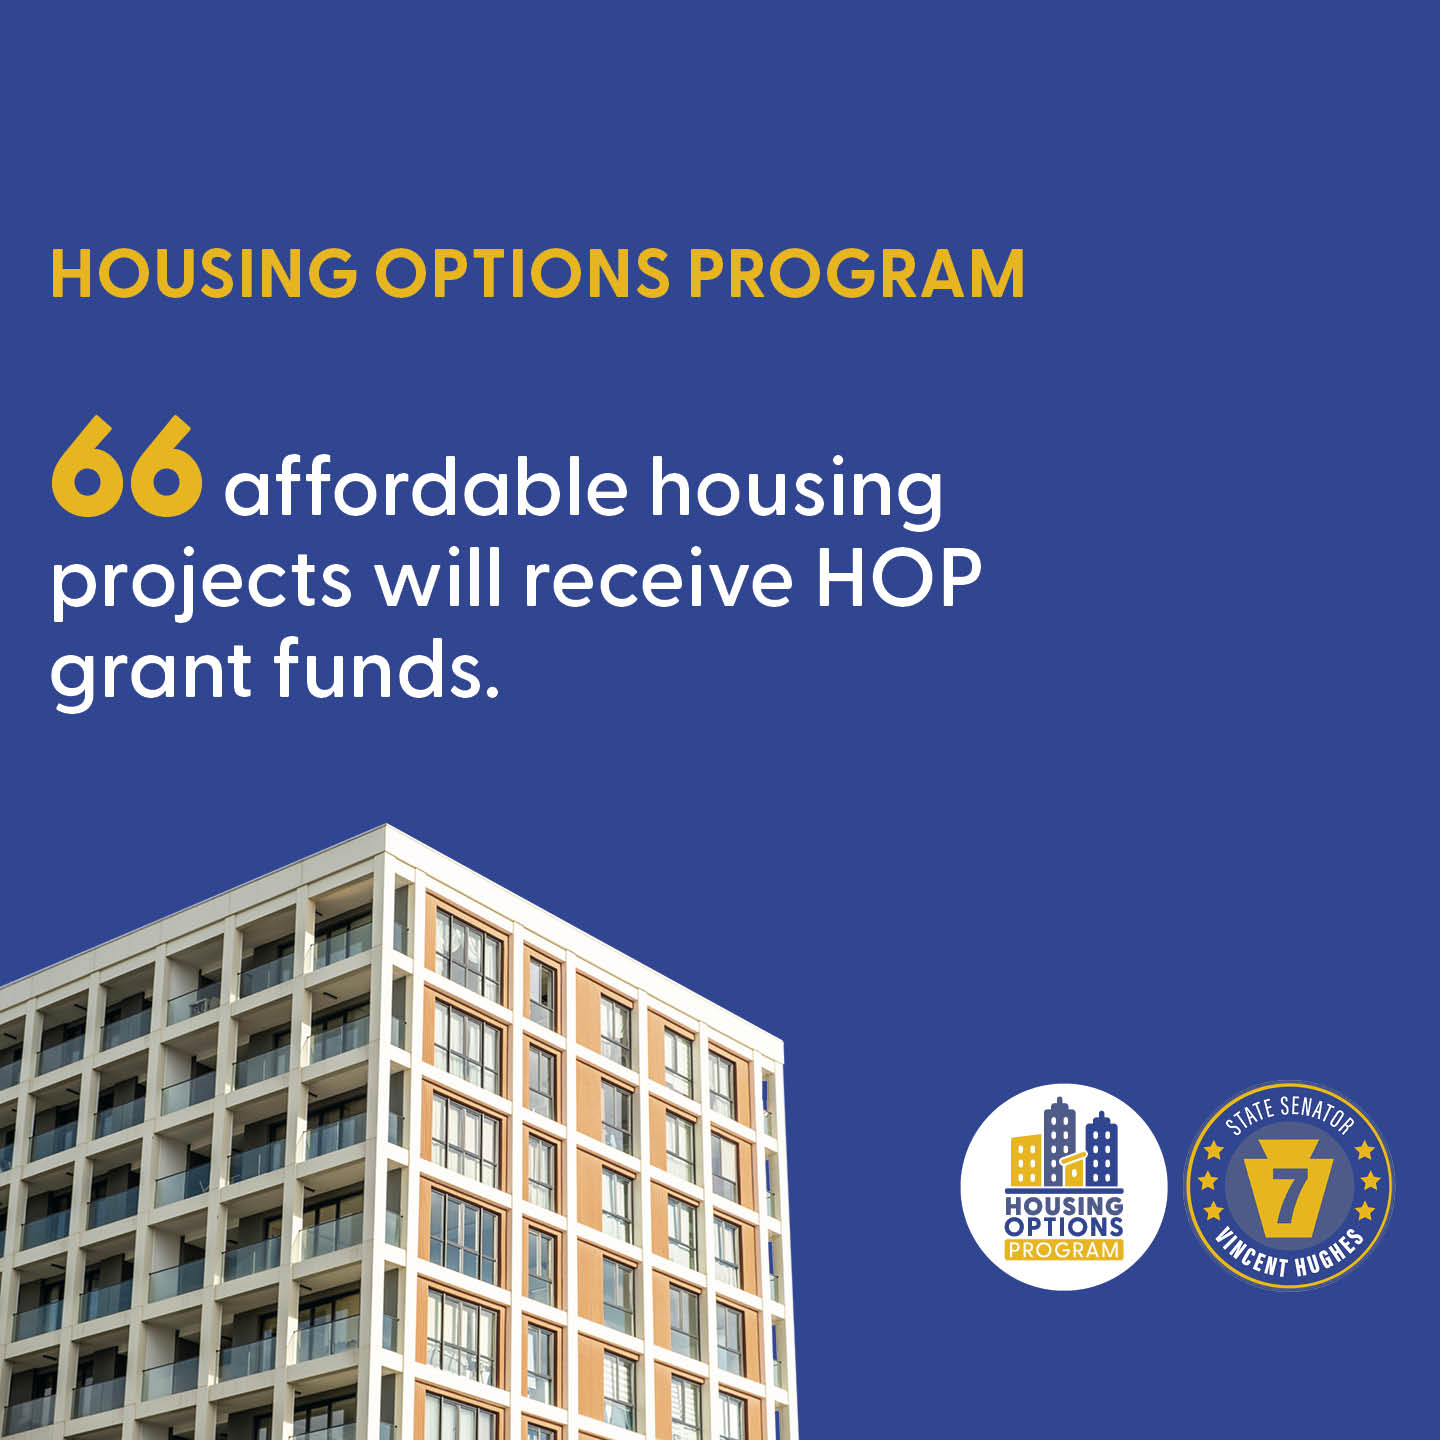 HOUSING OPTIONS PROGRAM - 66 affordable housing projects will receive HOP grant funds.